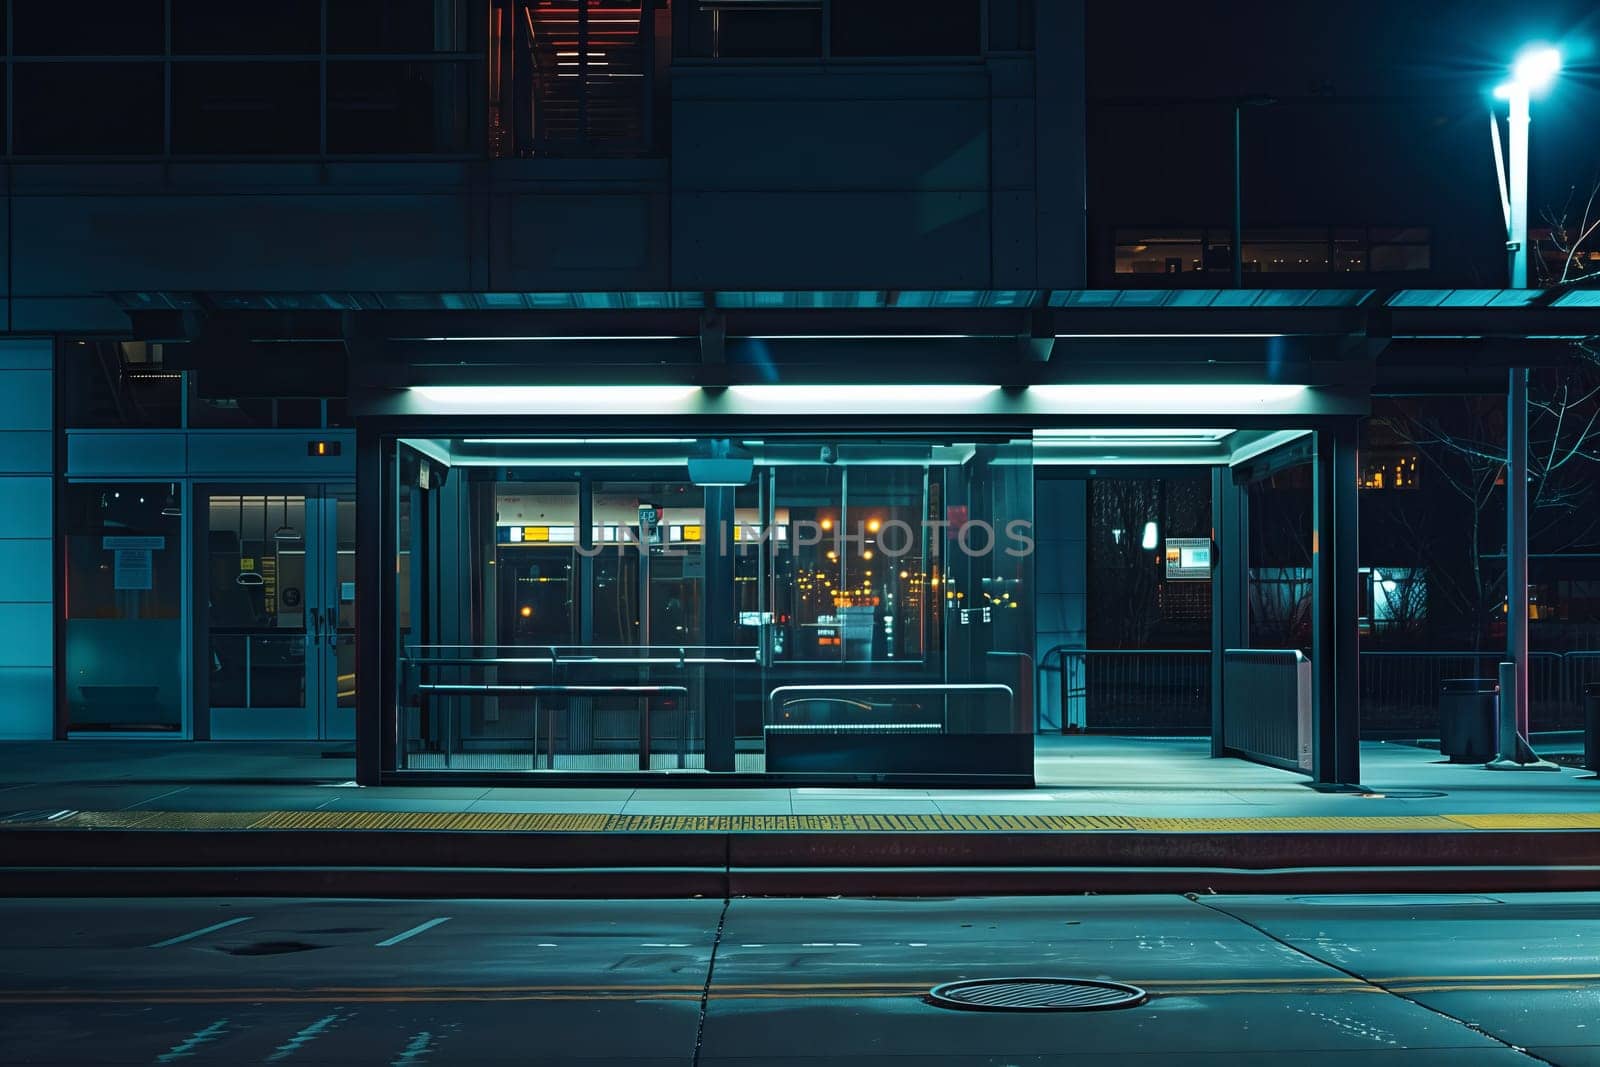 Automotive lighting illuminates bus stop in front of building at midnight by richwolf